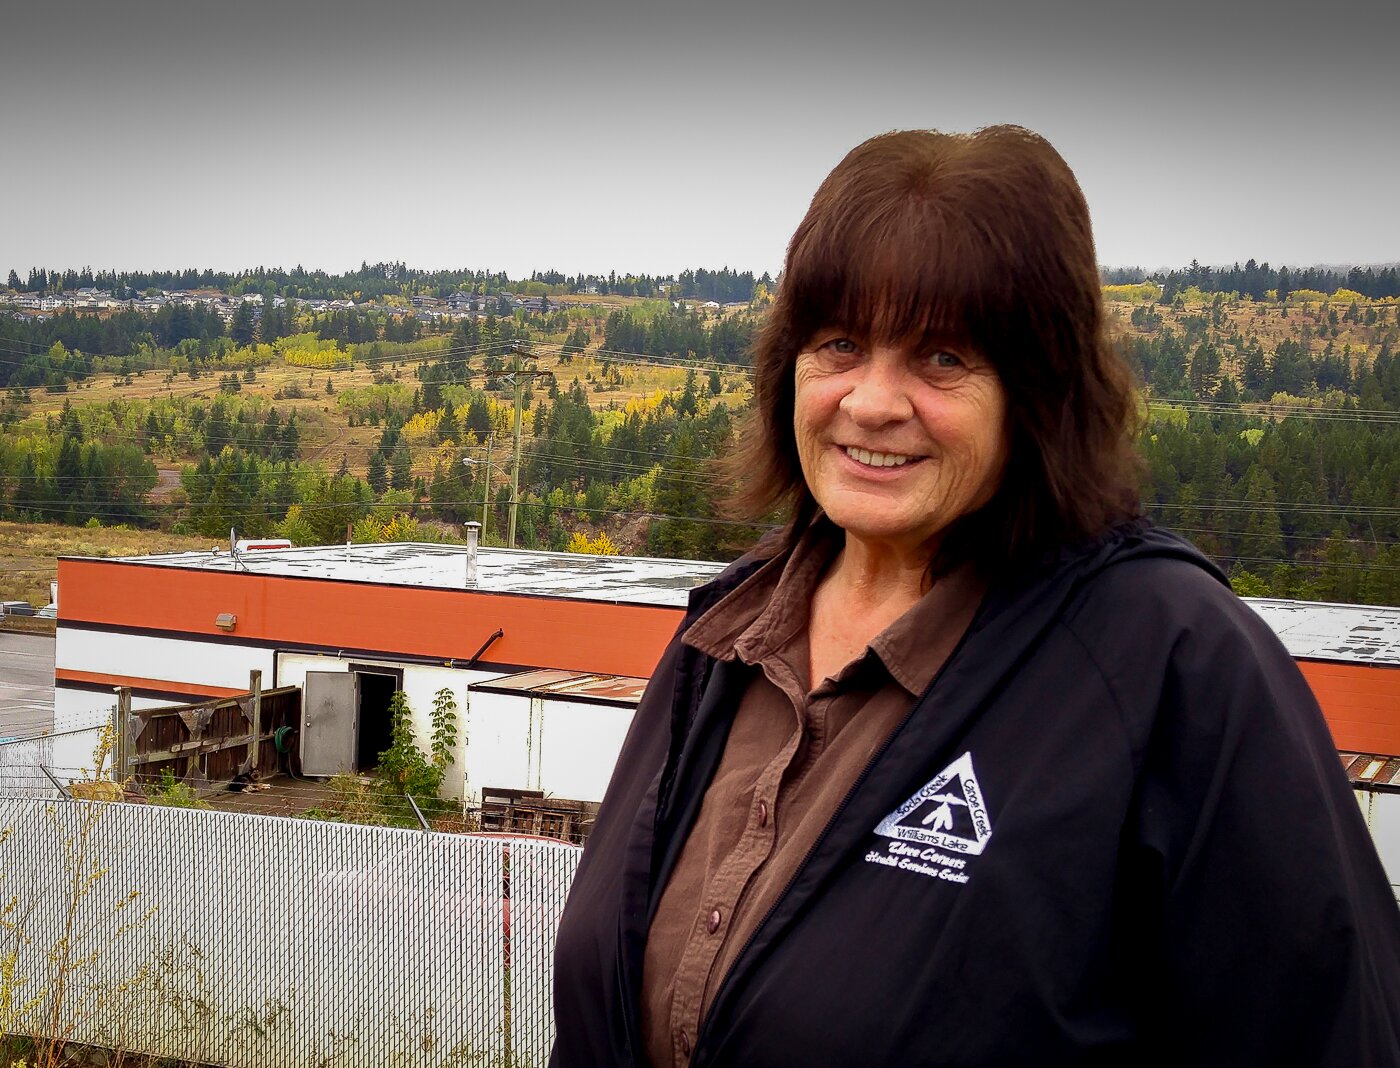 Lynn Dunford manages the mental health and addictions program at Three Corners Health Services Society in Williams Lake. She often supports parents who are taking court-ordered programs. Brielle Morgan